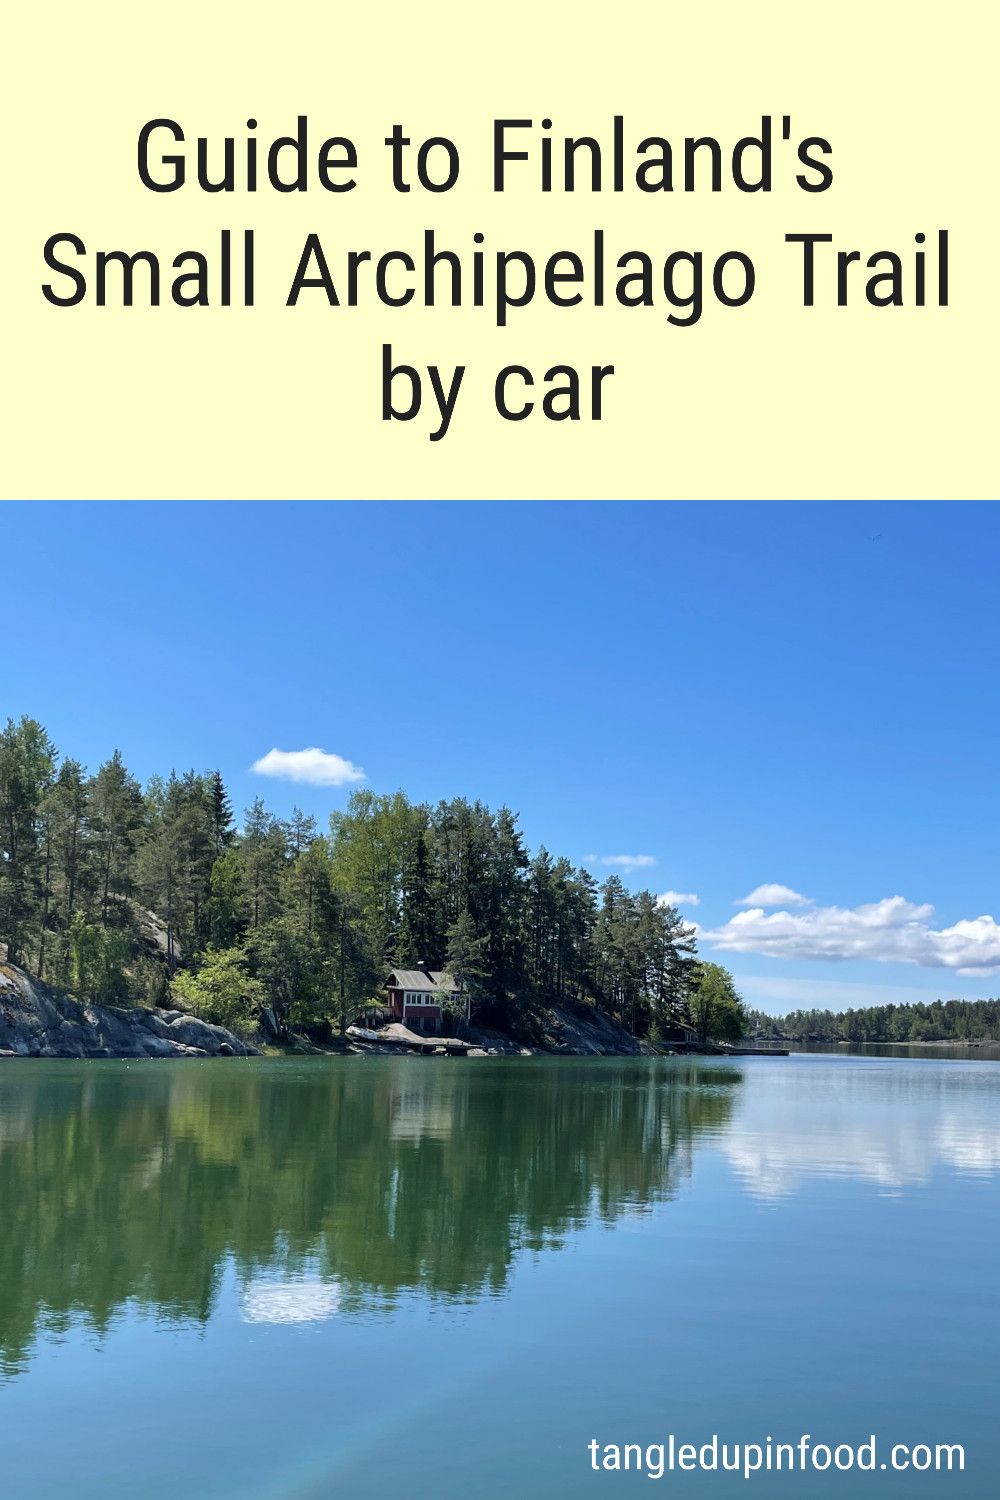 Photo of lake with island and text reading "Guide to Finland's Small Archipelago Trail by car"